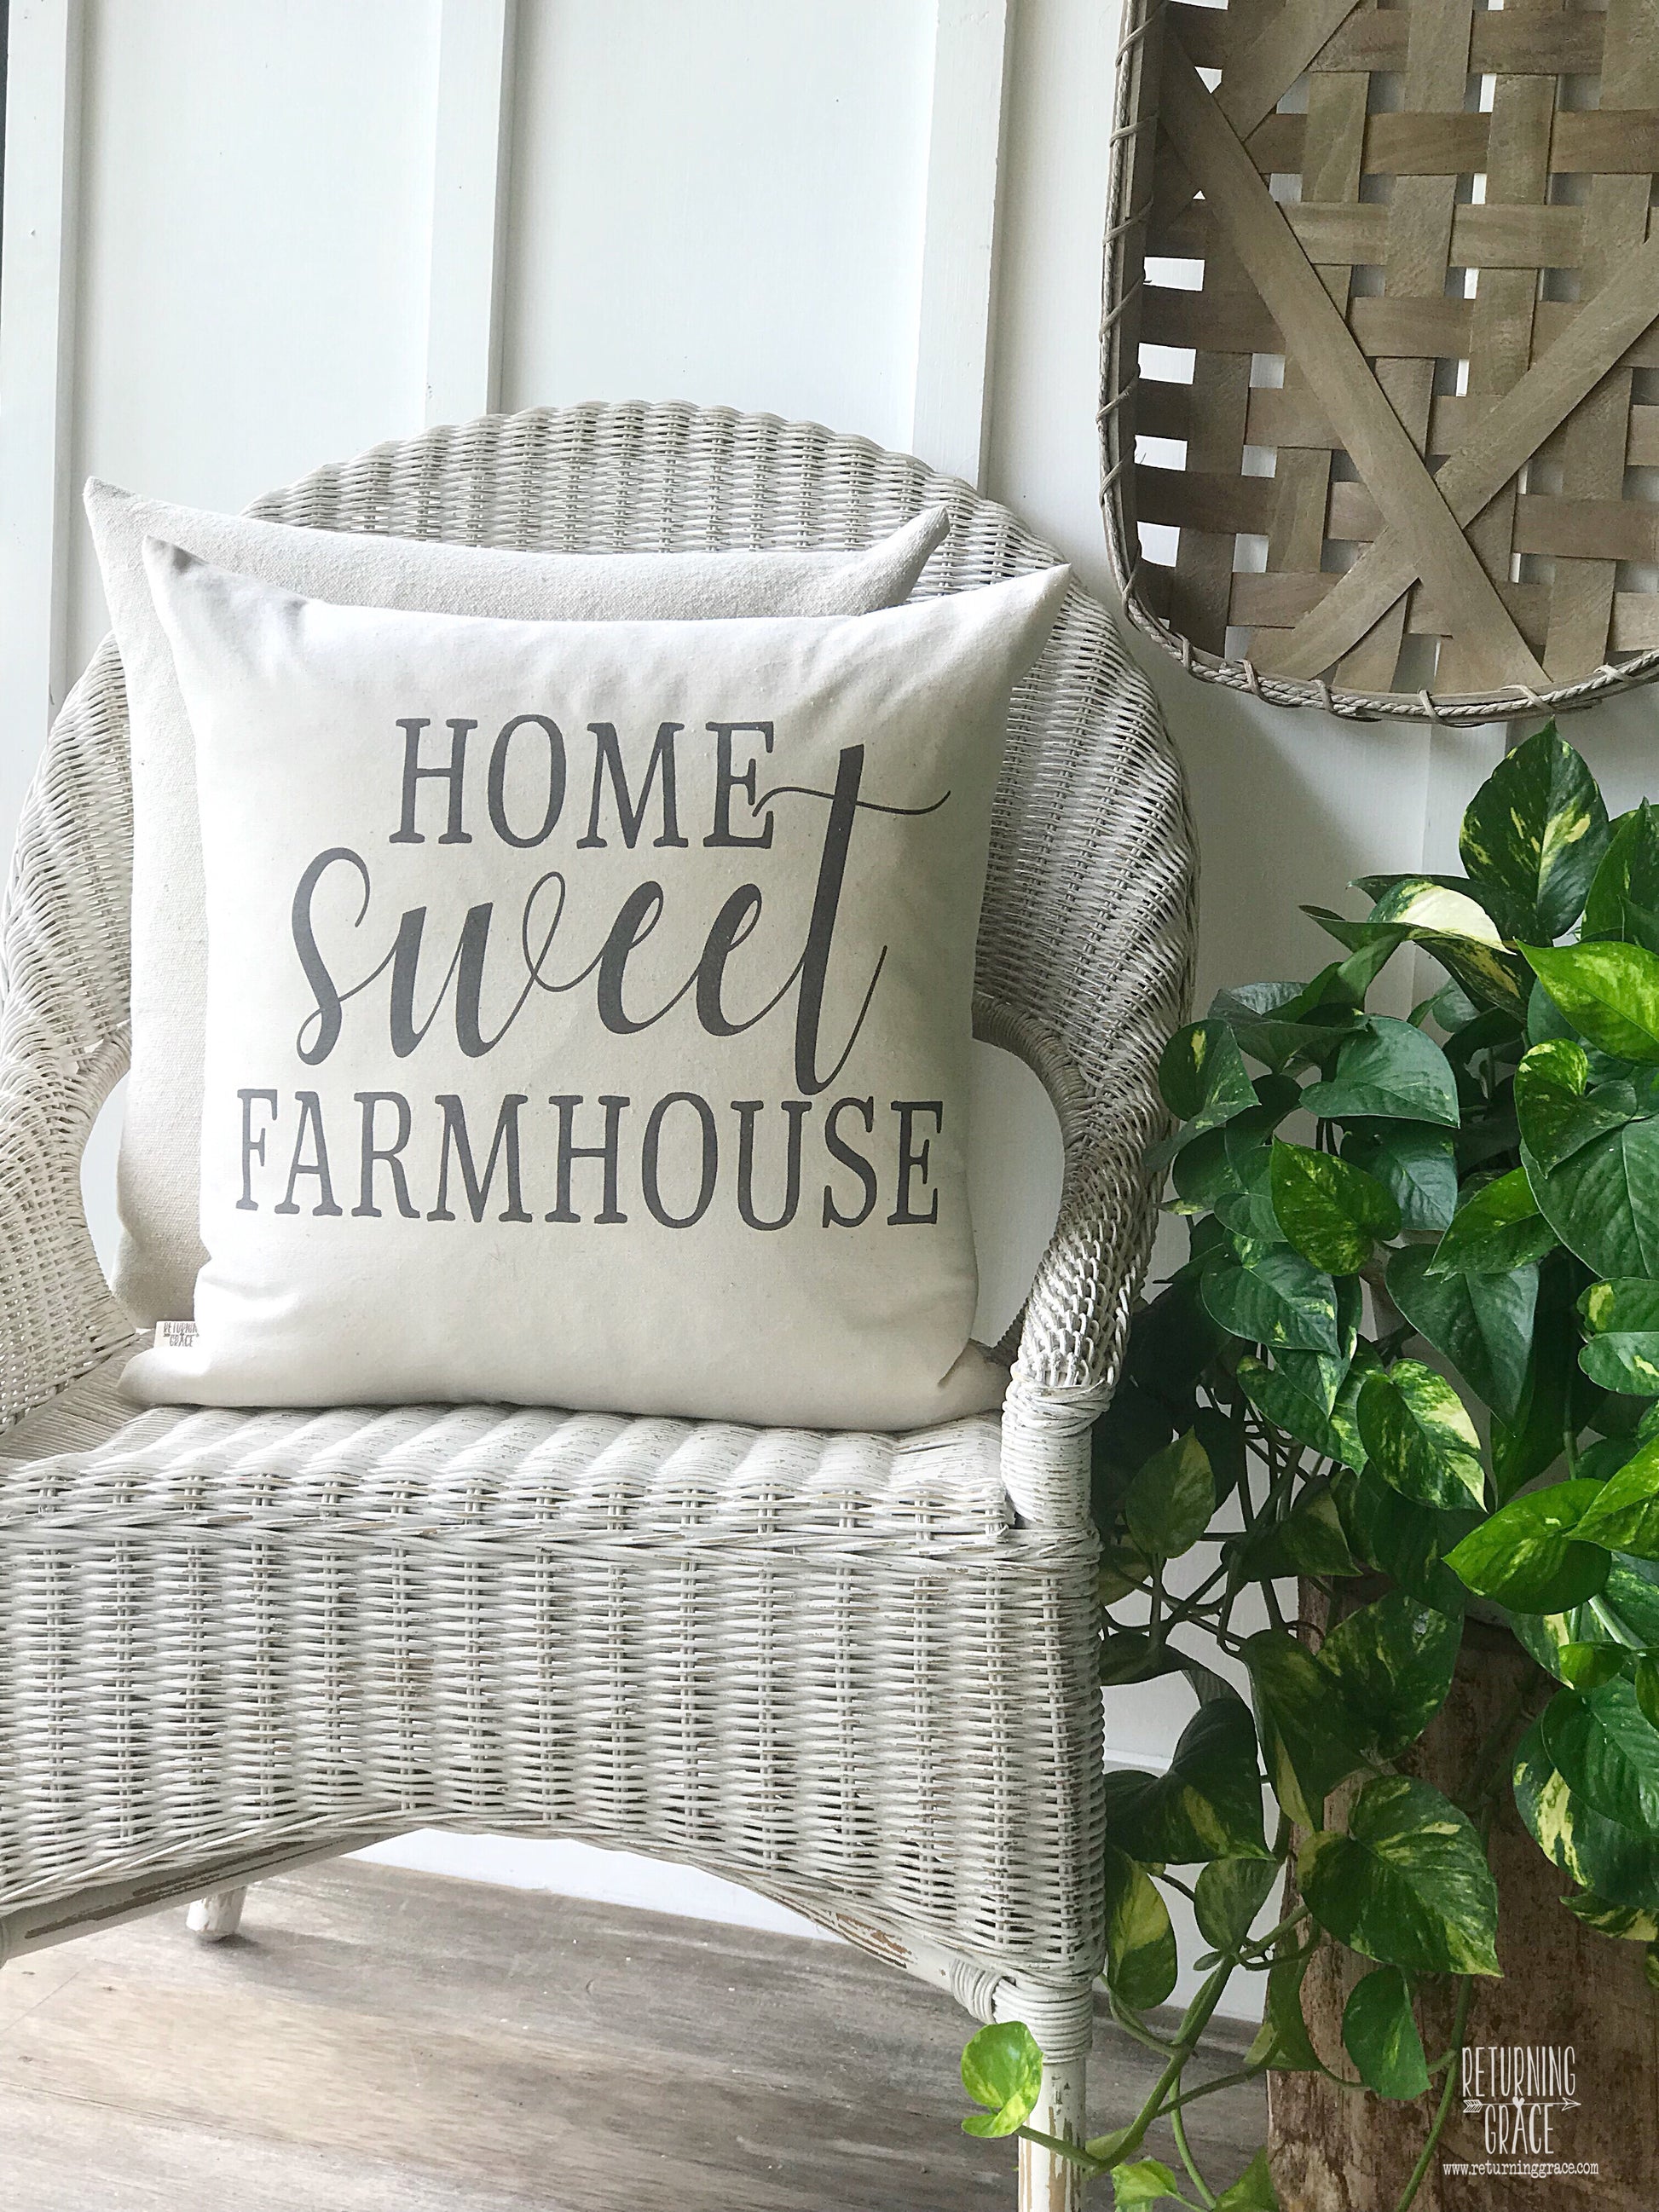 Home Sweet Farmhouse Pillow Cover - Returning Grace Designs